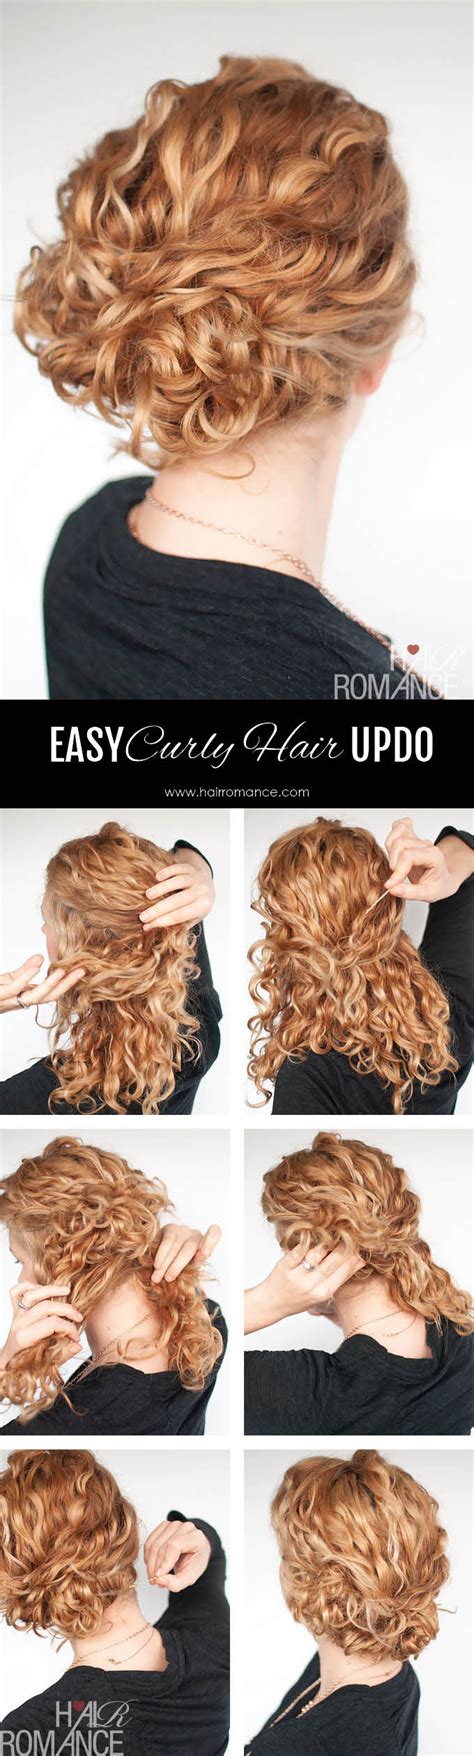 Unique Easy Updo Hairstyles For Long Curly Hair Hairstyles Inspiration